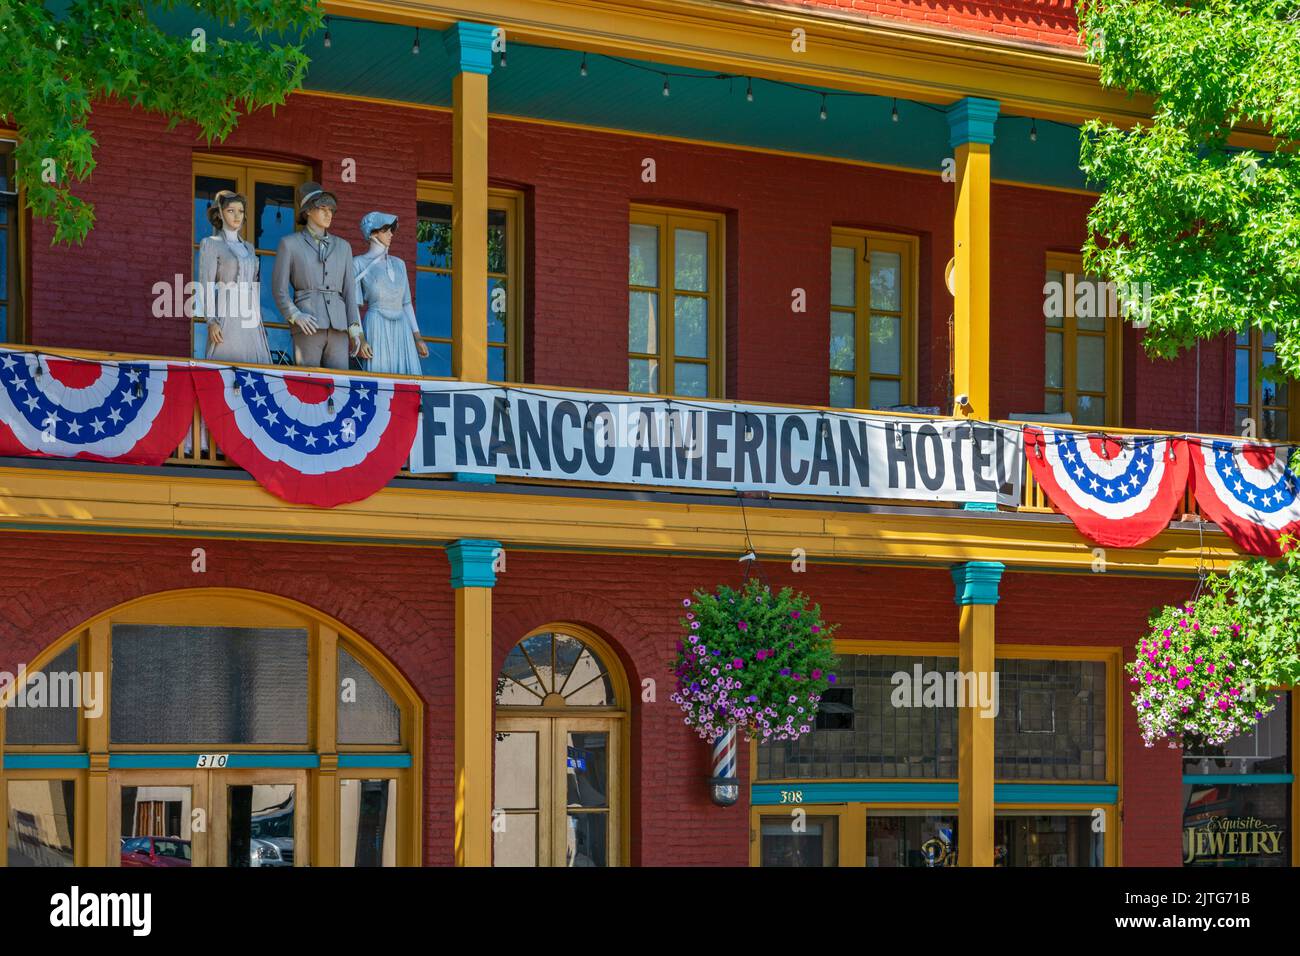 California, Yreka, Old Town, Franco American Hotel, started 1855, mannequins on balcony Stock Photo